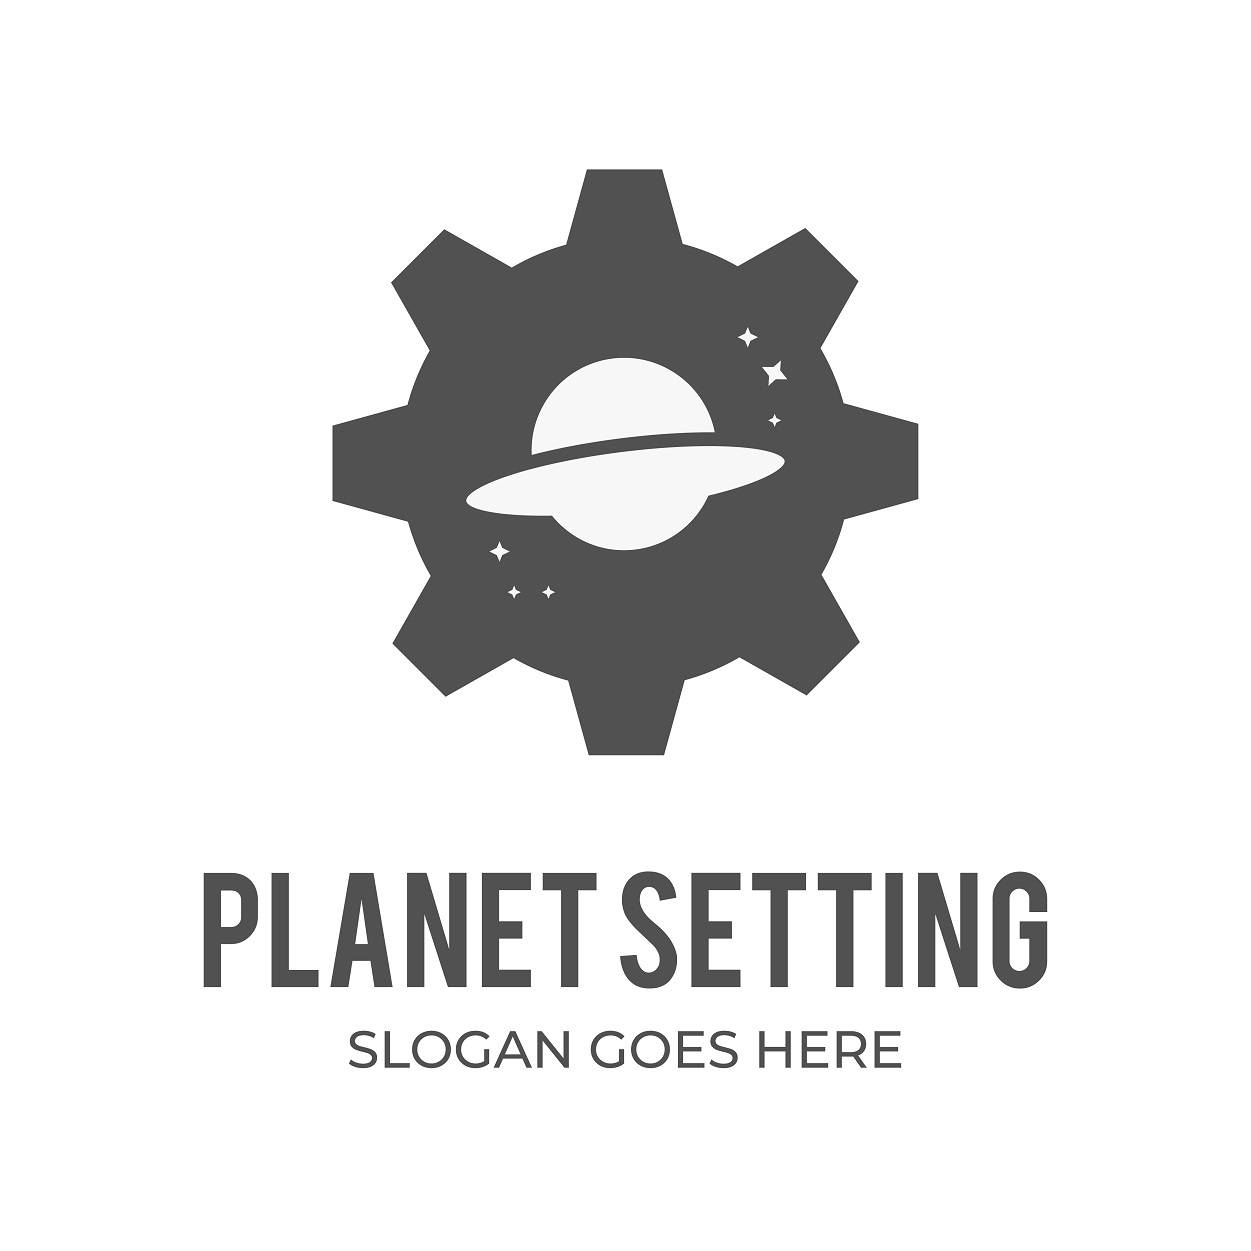 Planet and setting vector logo design